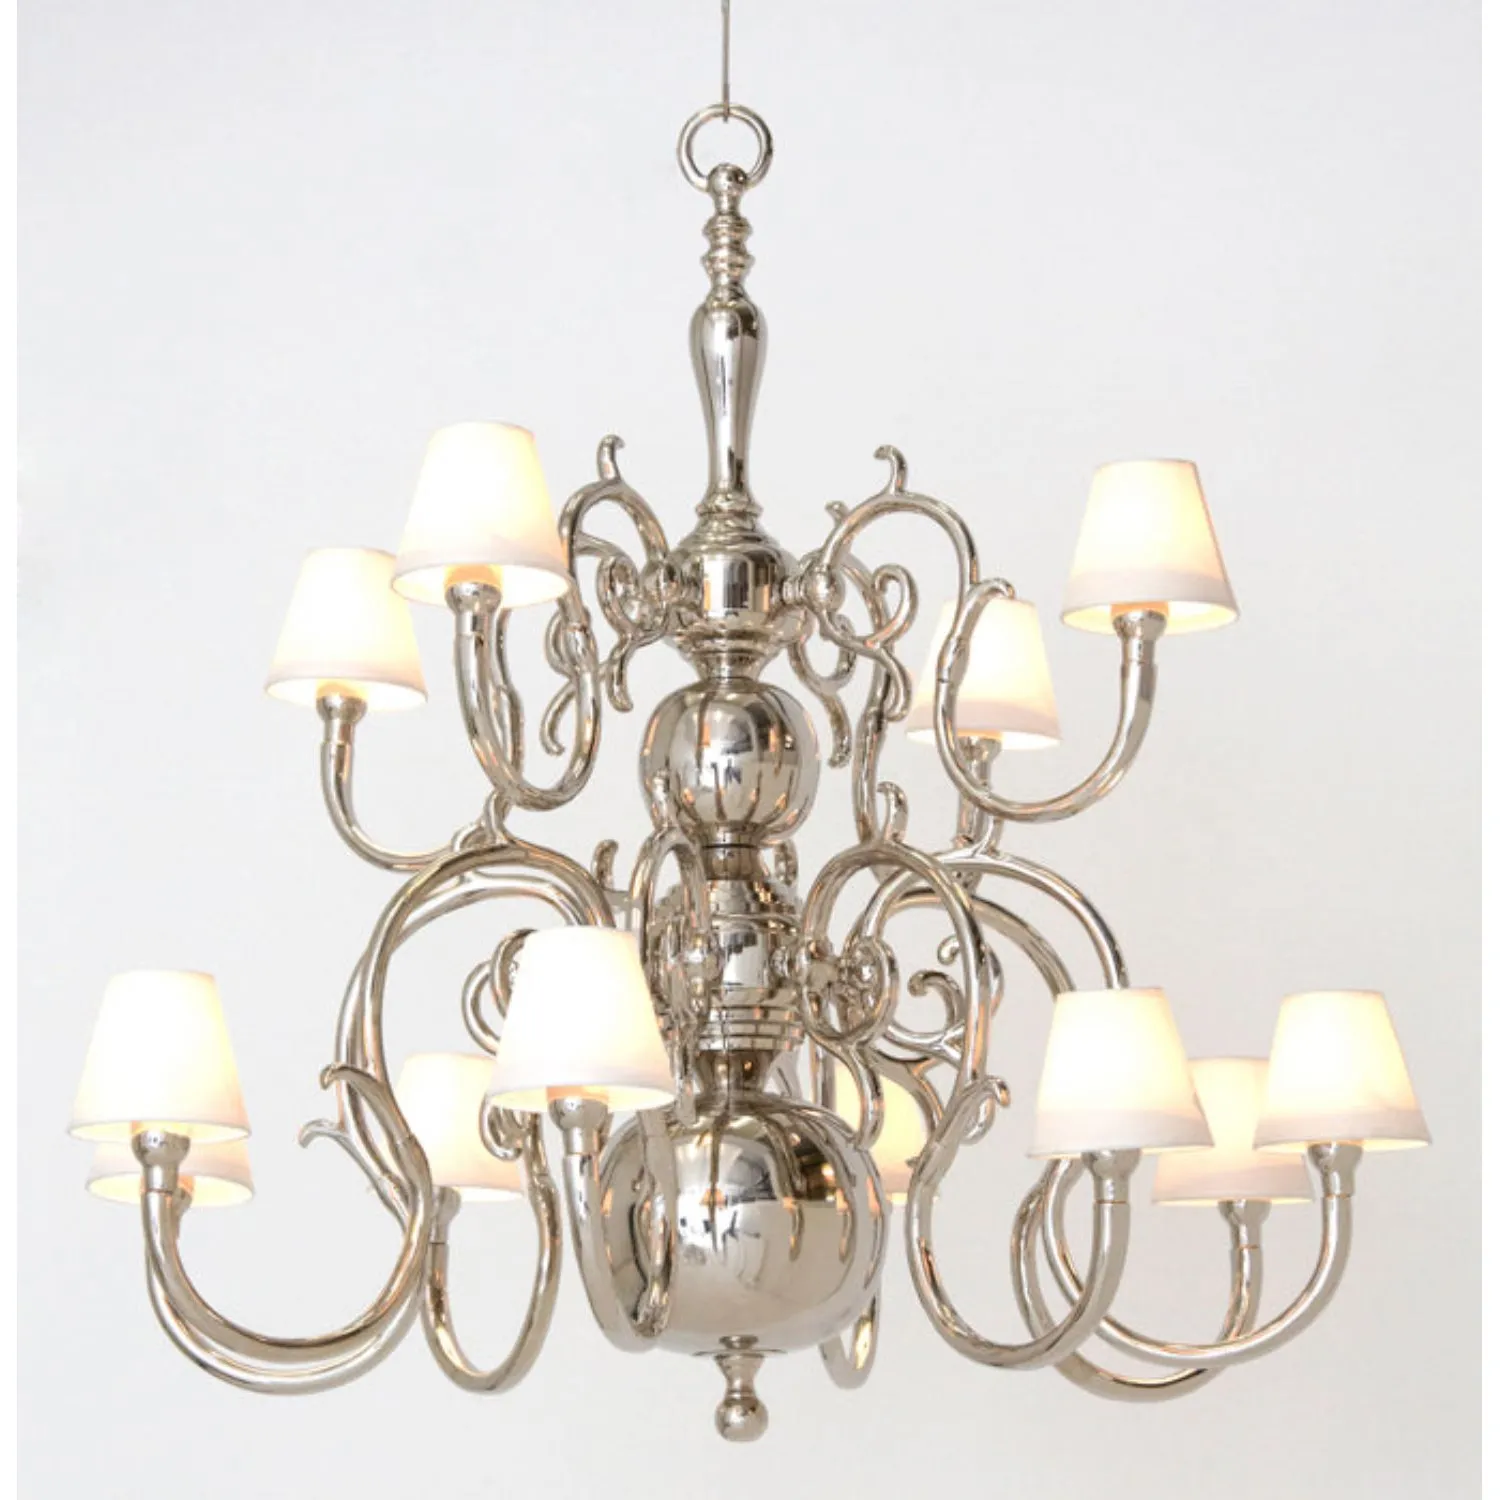 MLP 30 Chandelier Nickel with White Shades